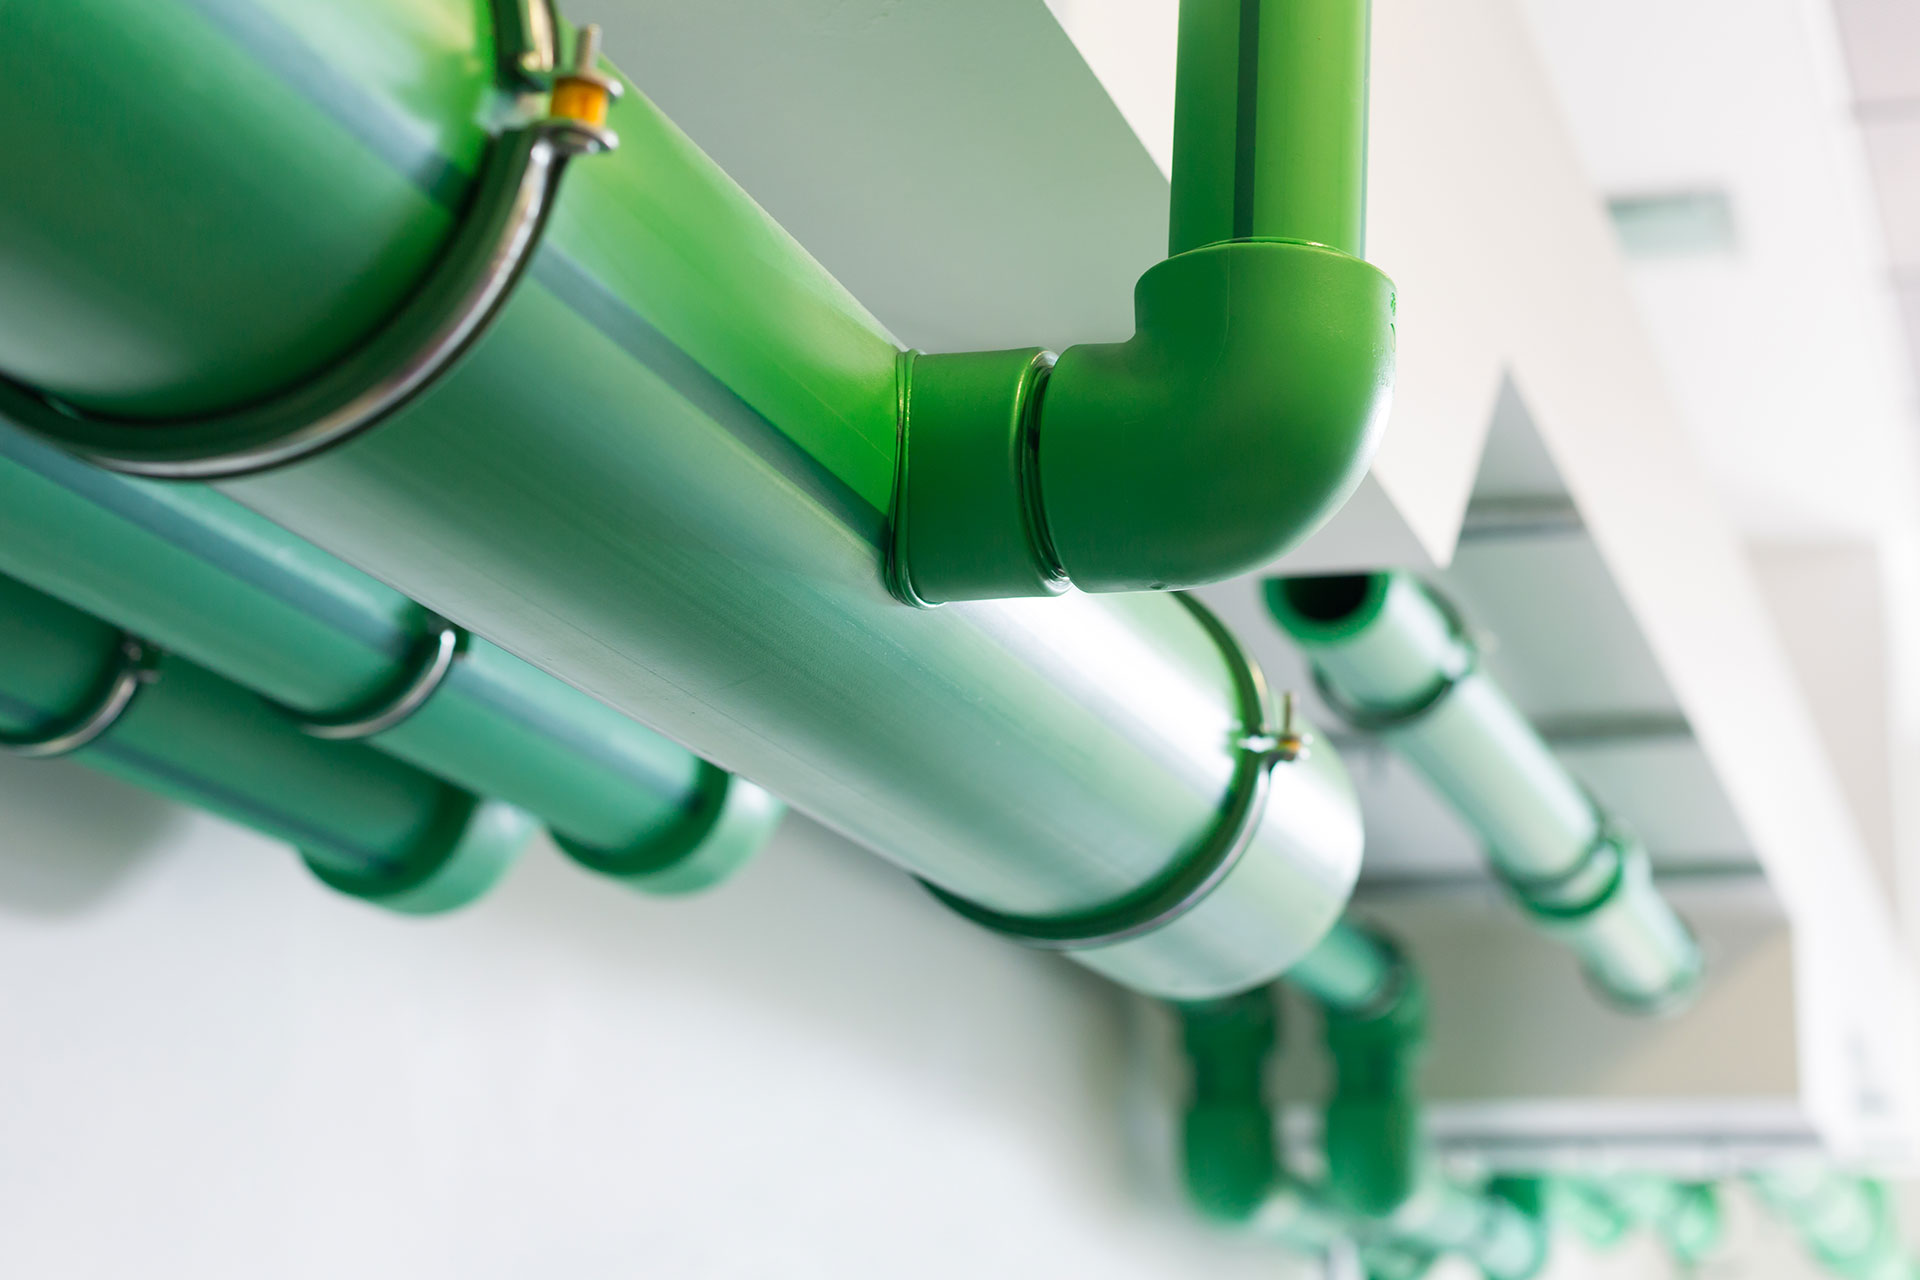 plastic piping system